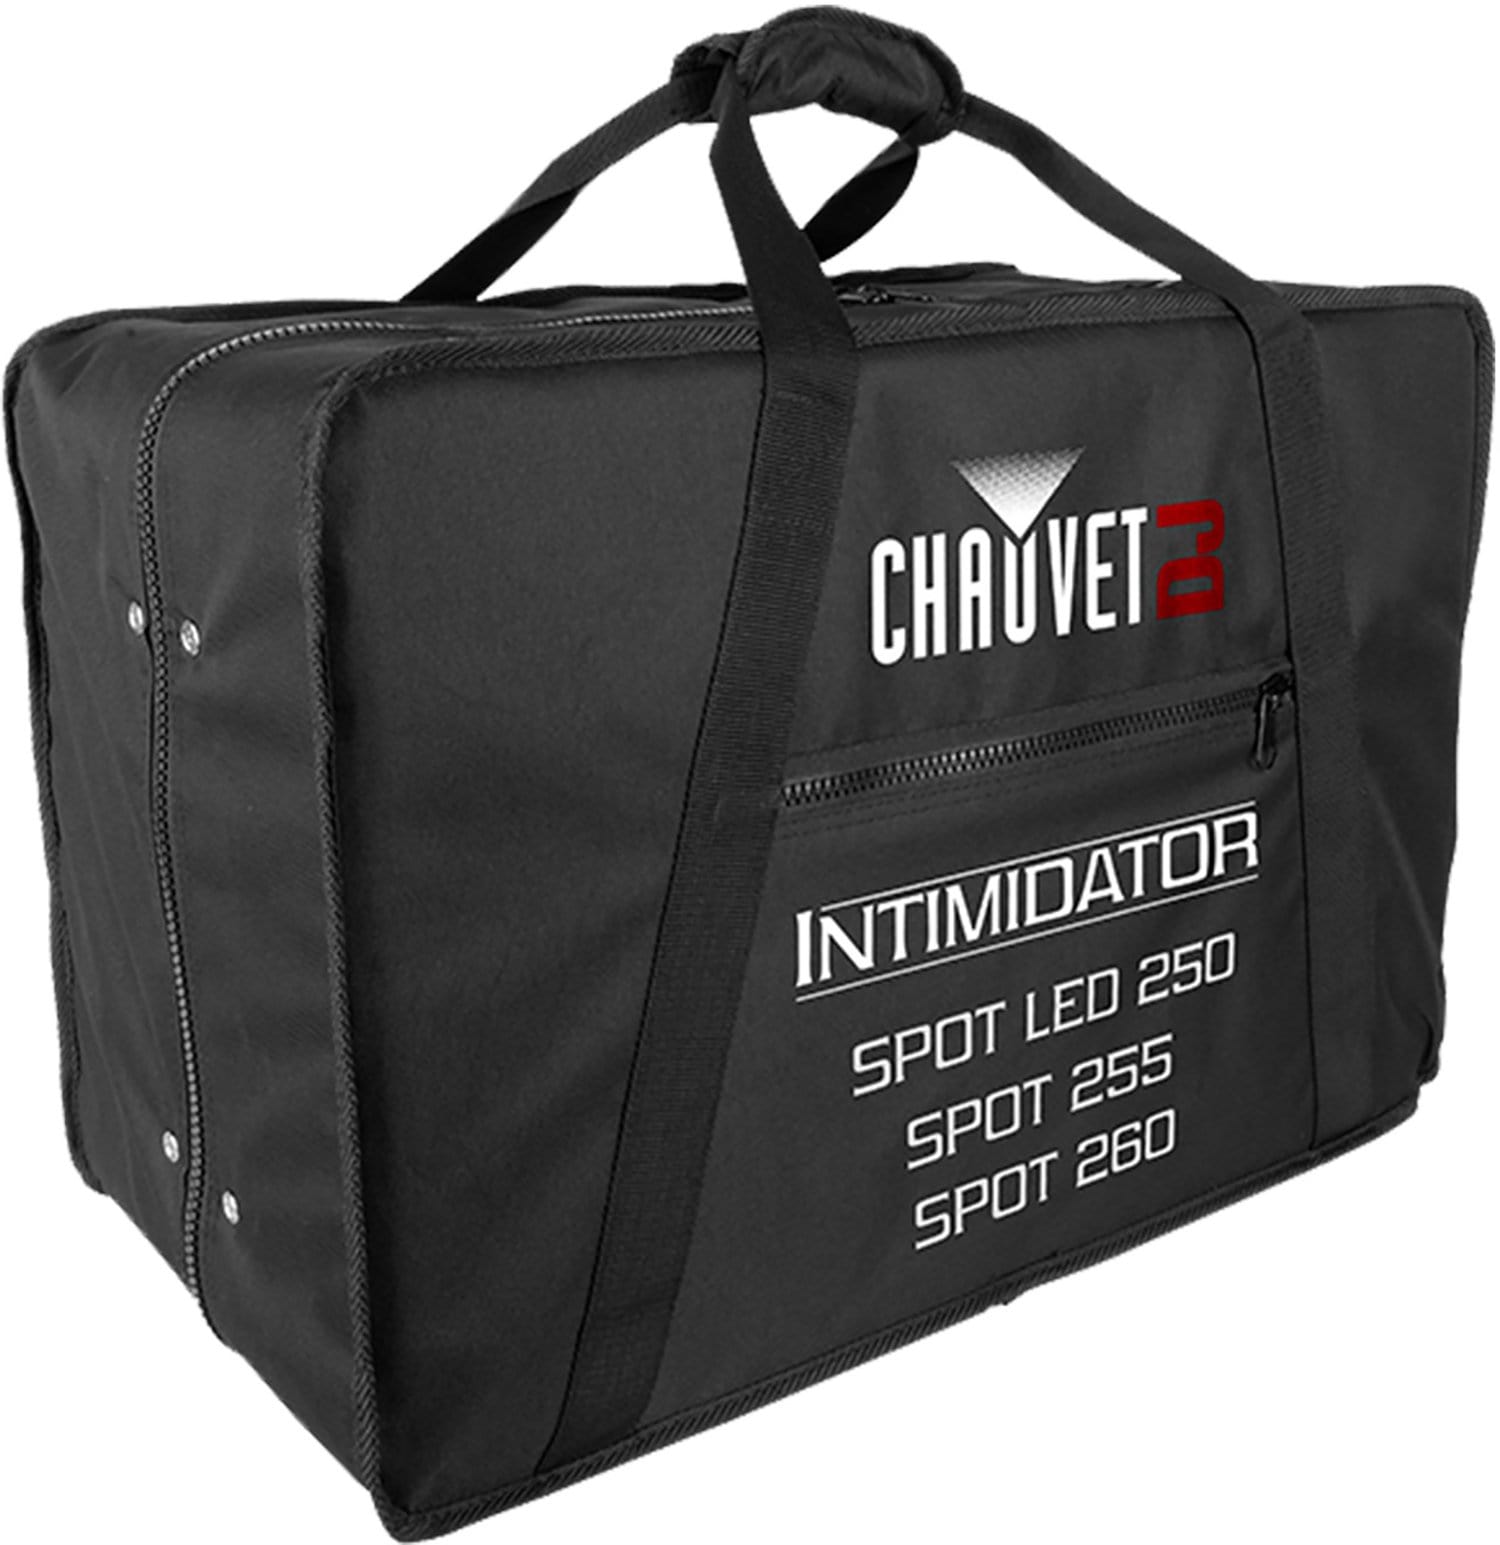 Chauvet CHS-2XX VIP Carry Bag for 2x Intim Spot 250, 255, 260 IRC Fixtures - ProSound and Stage Lighting